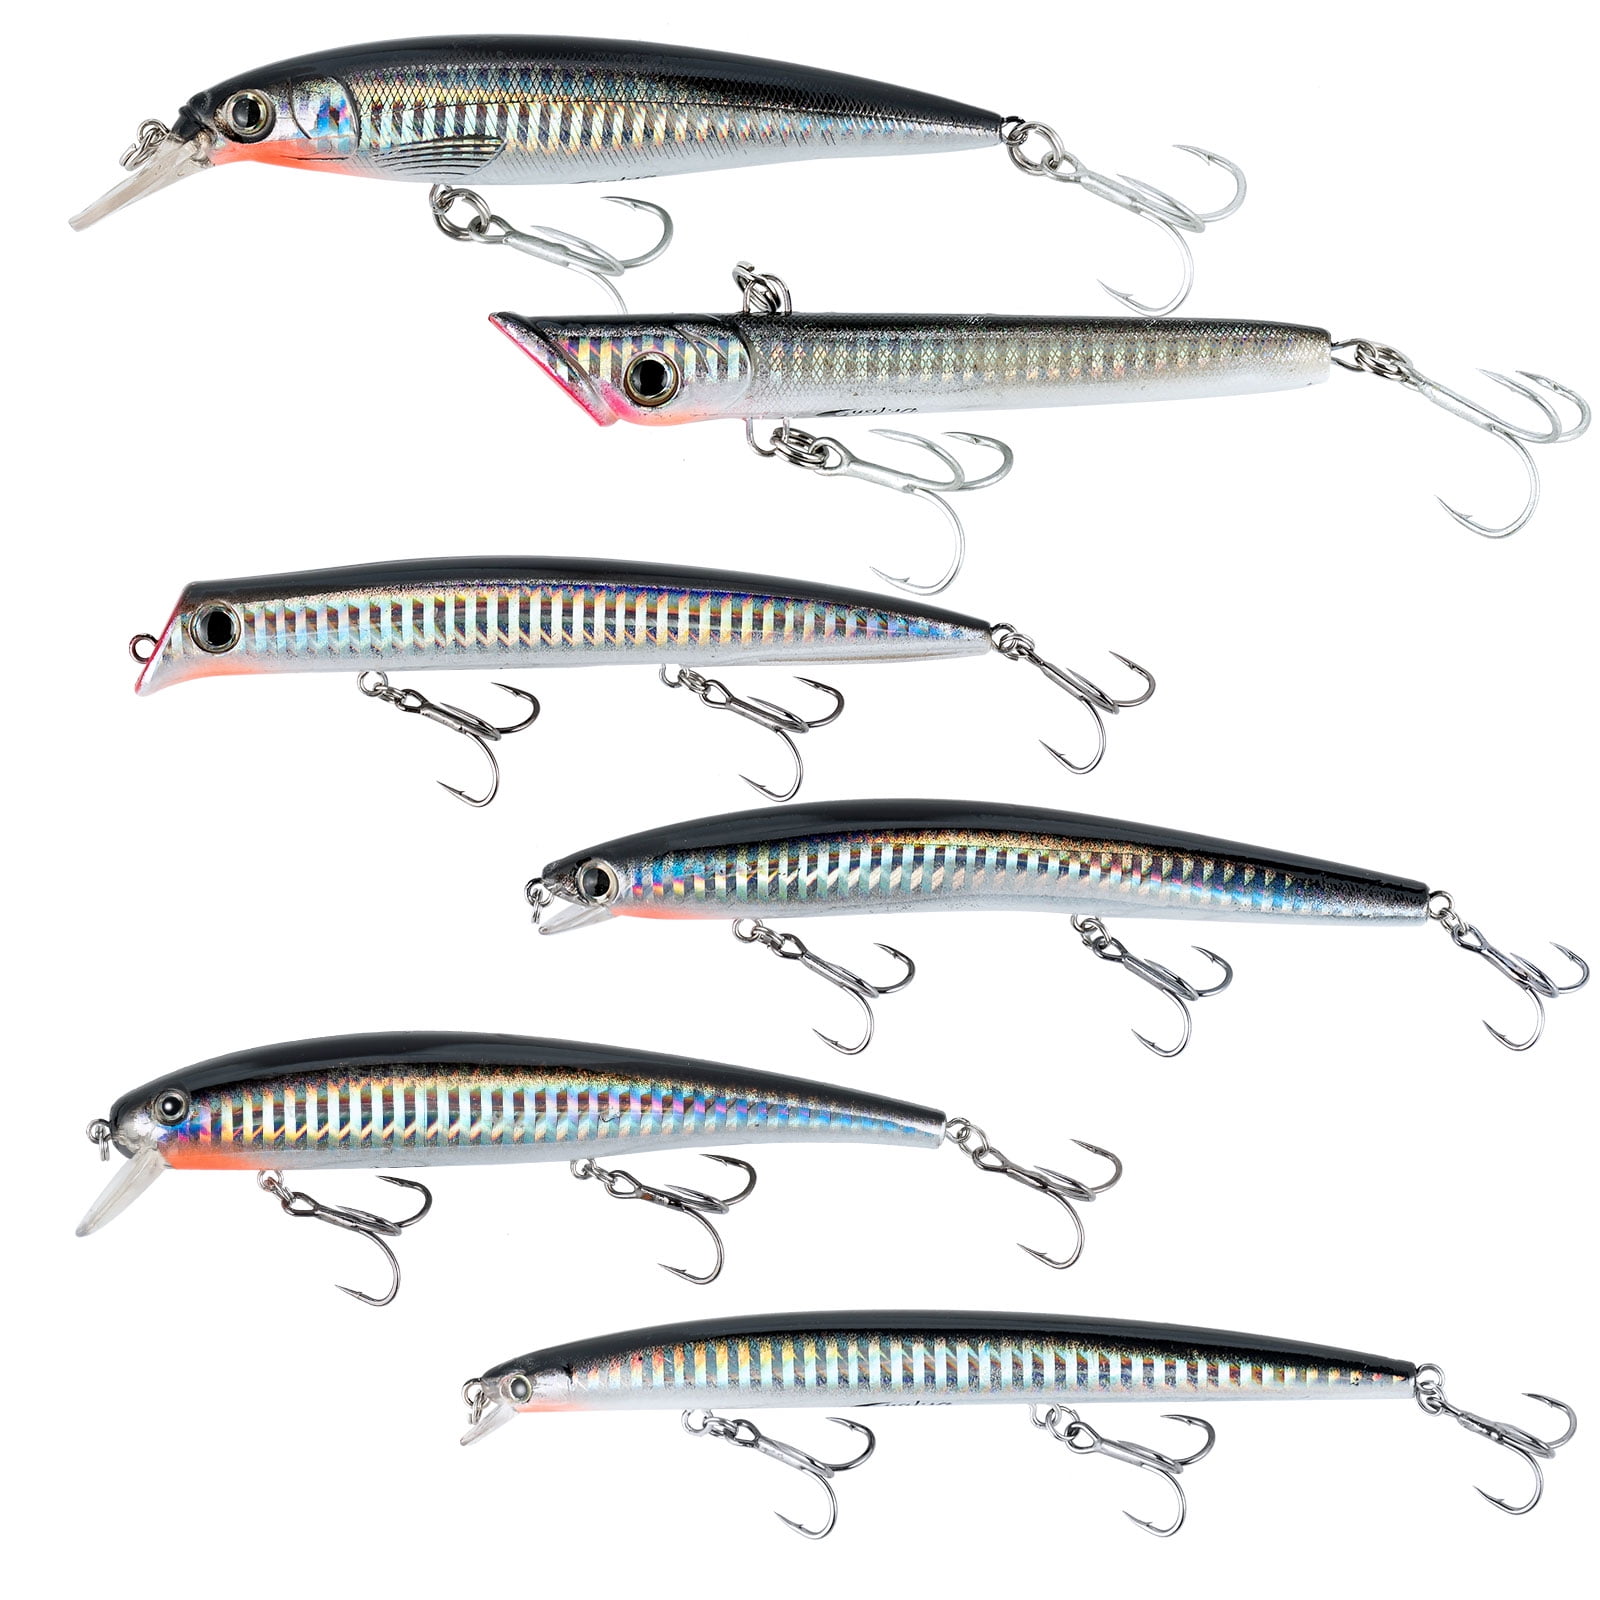 Cross Line Barrel Swivels T-Turn Fishing Lure Connector Saltwater Tackle 35-175LB Dr.Fish 30 Pack Stainless Steel Fishing 3-Way Swivels 